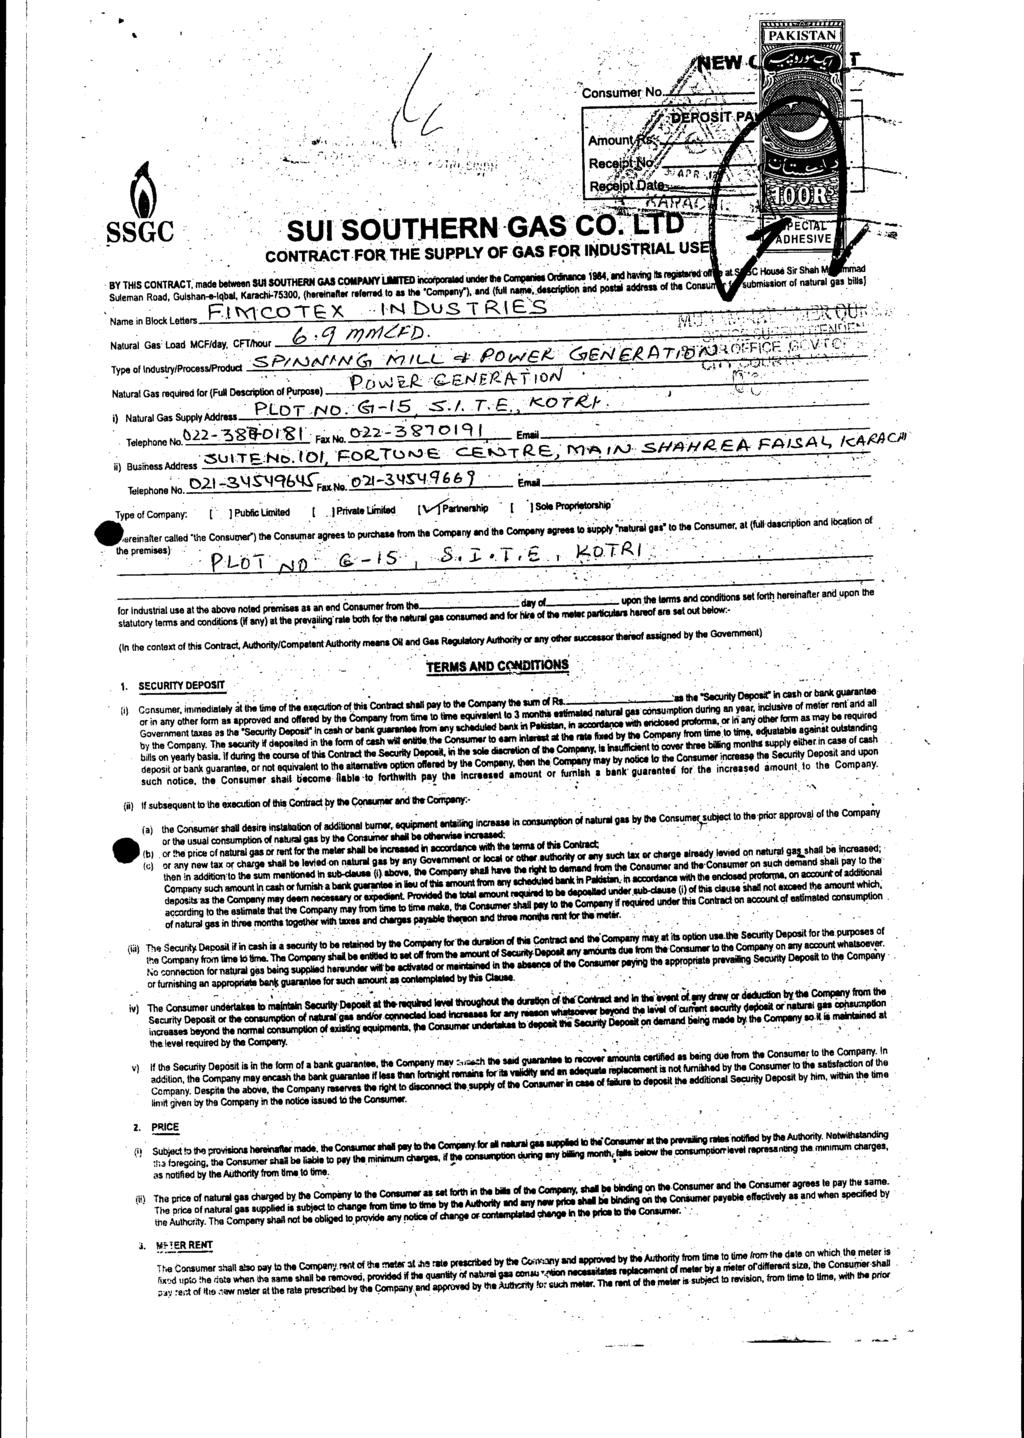 ... Receipt [gip. SSGC - SUI SOUTHER N -GAS.C a.,,l CONTRACT.F012:THE SUPPLY OF GAS FOR INDUSTRIAL US BY THIS CONTRACT.